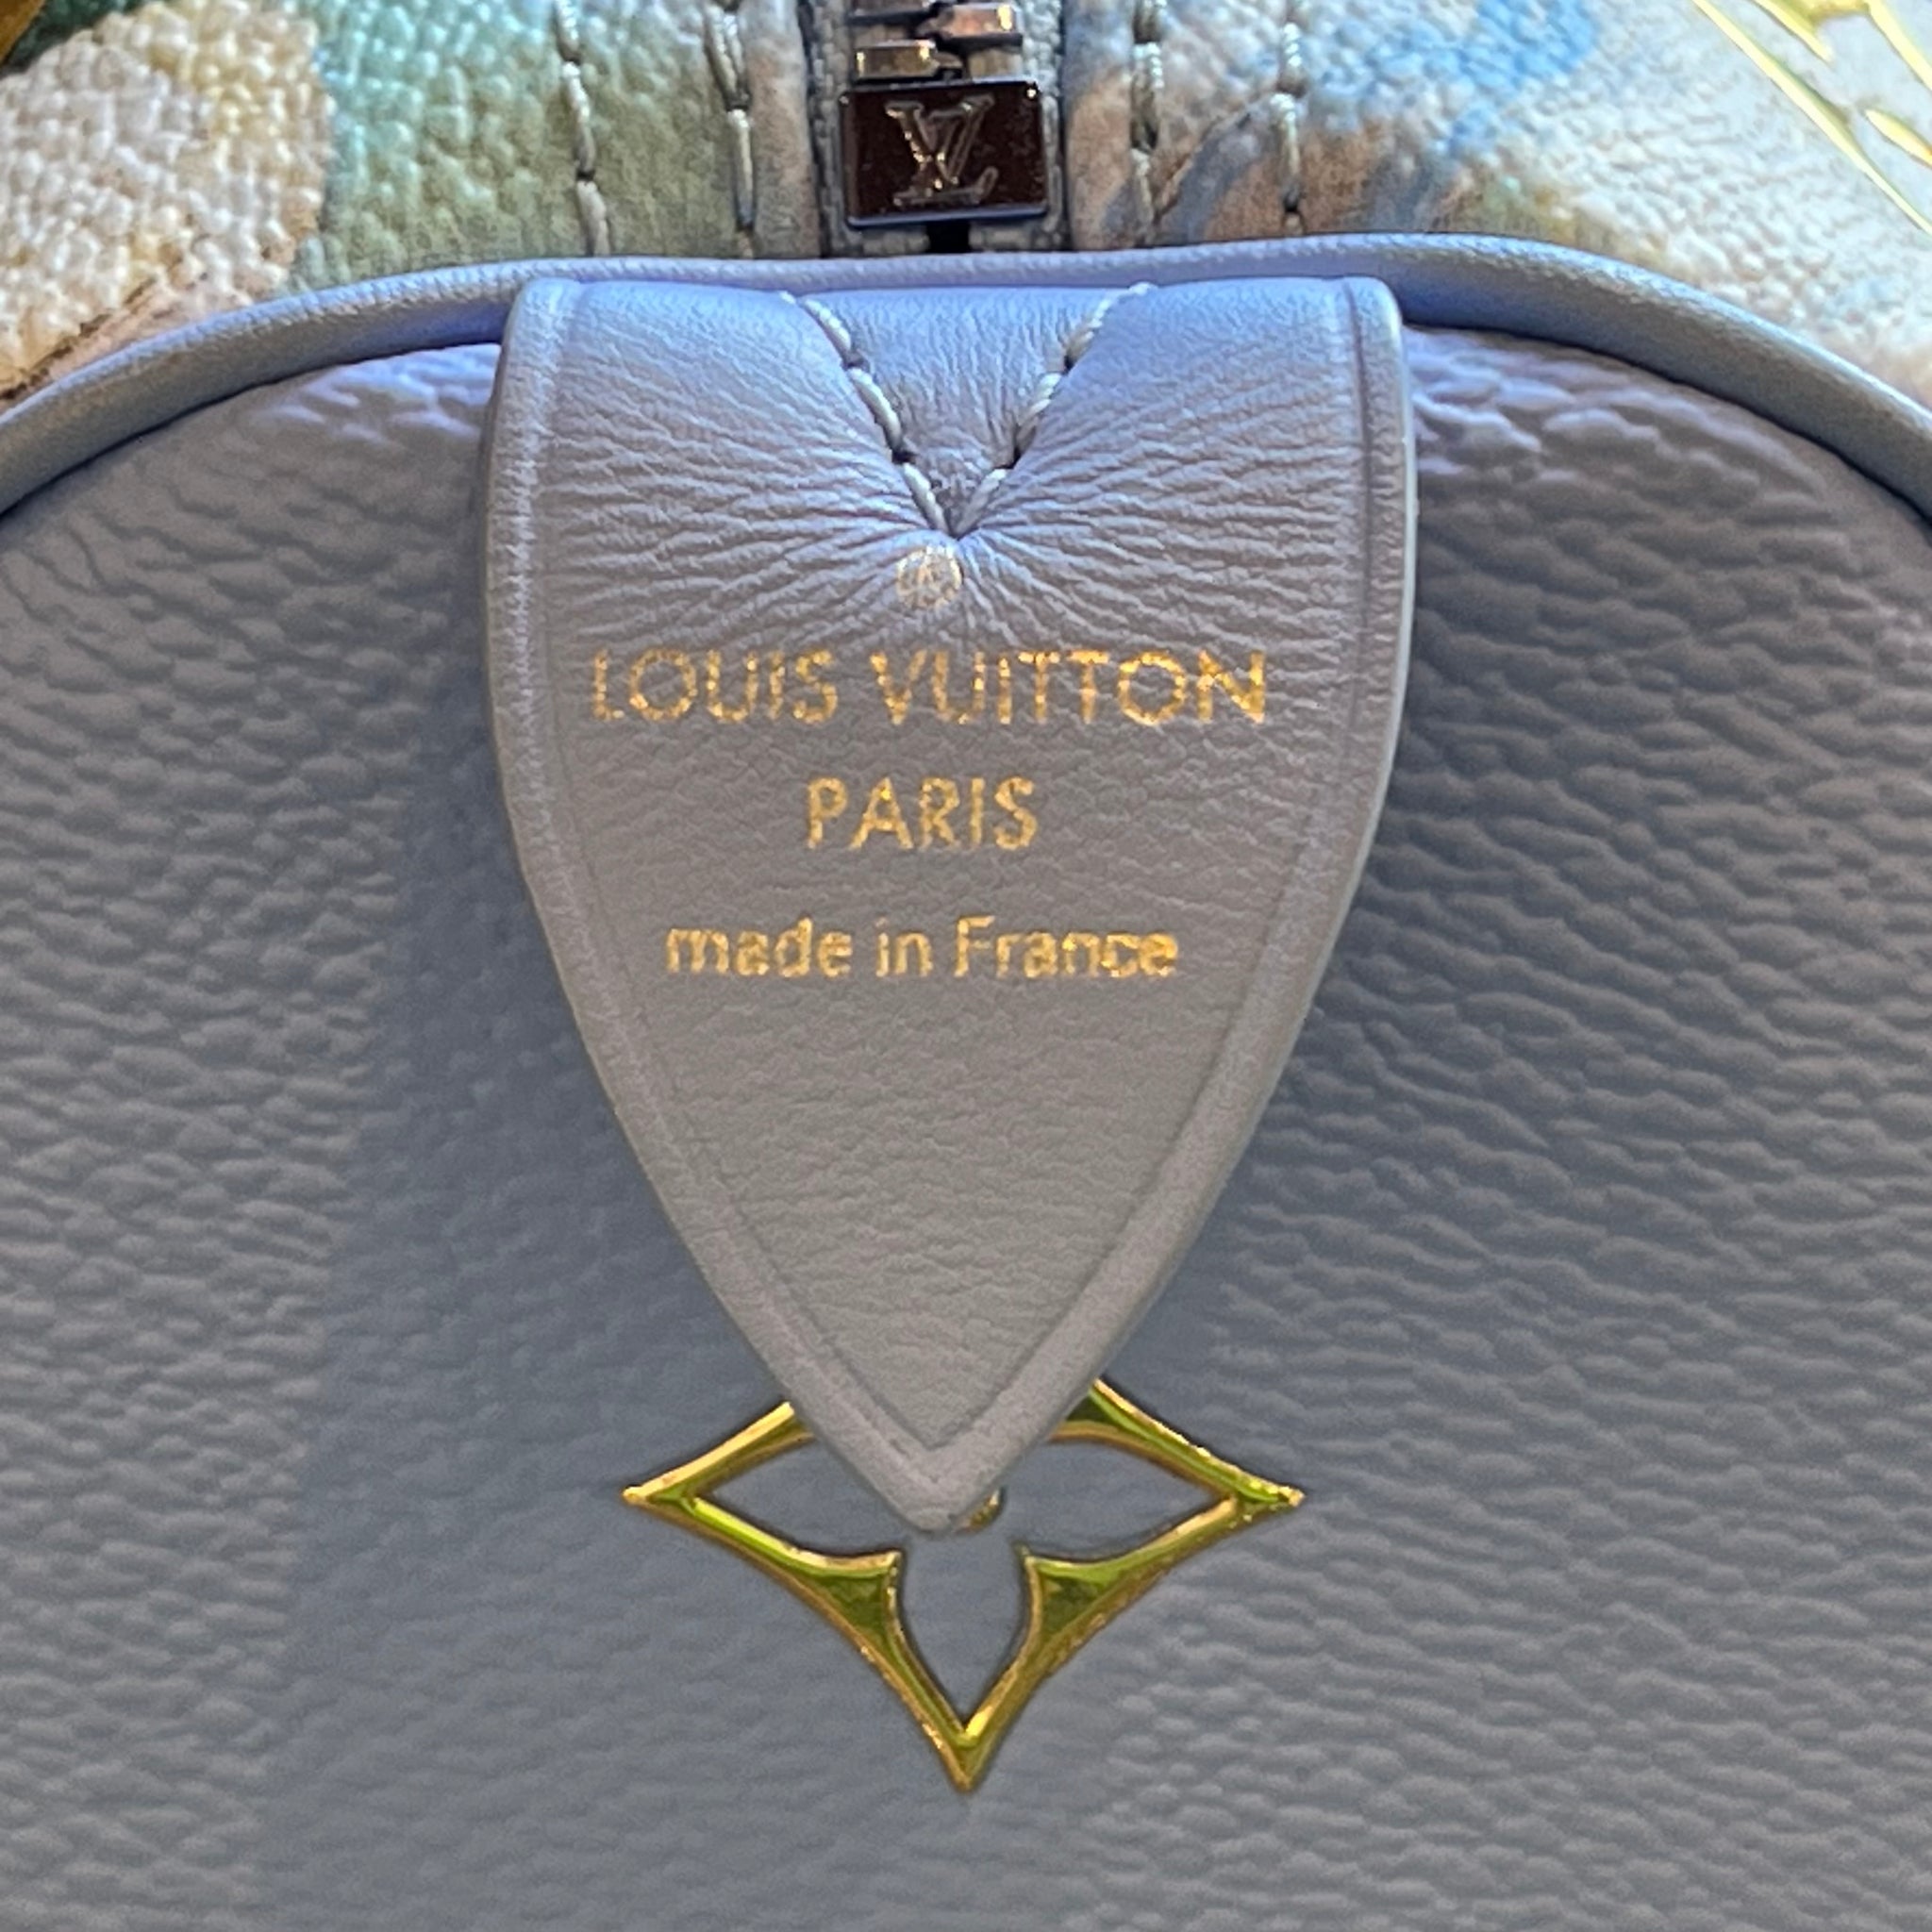 LOUIS VUITTON Limited Edition Coated Canvas Jeff Koons Van Gogh Master -  The Purse Ladies